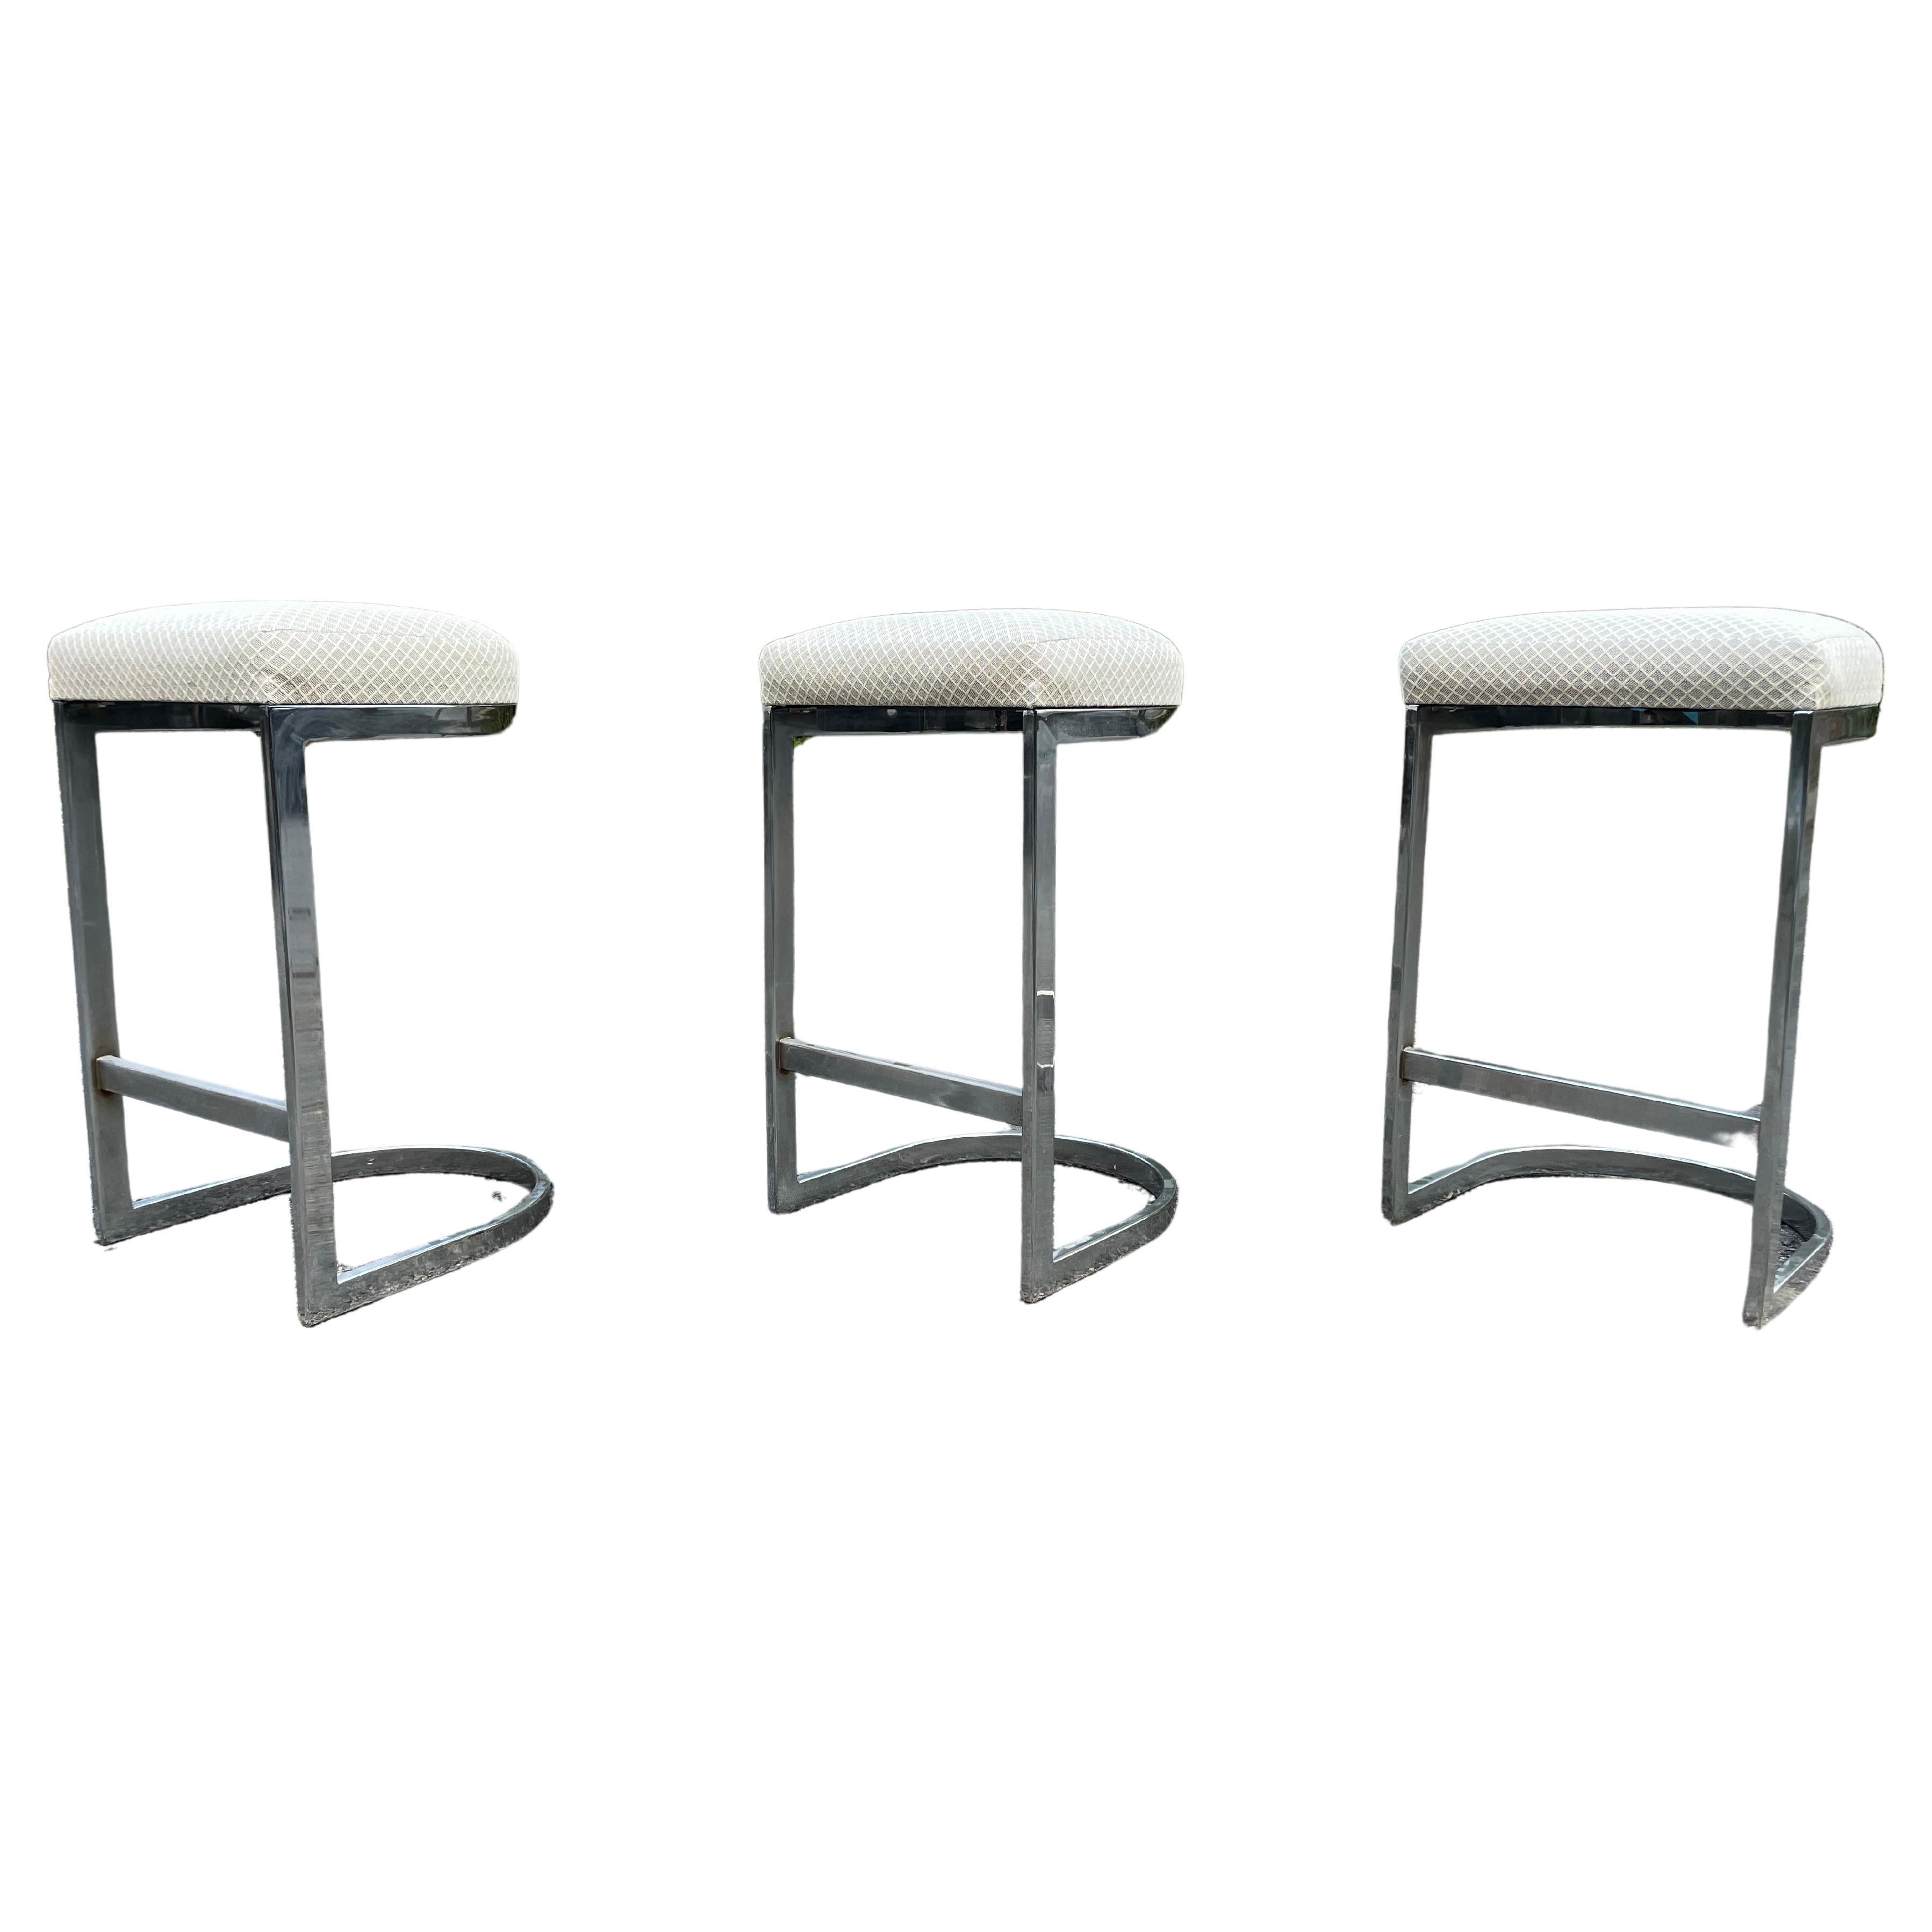 Set of three sculptural chrome cantilever bar stools by Milo Baughman. 

Great lines on these bar stools. Clean and simple design. The chrome really plays well off the blush.

Chrome flat bar bases and the fabric are both in very good vintage